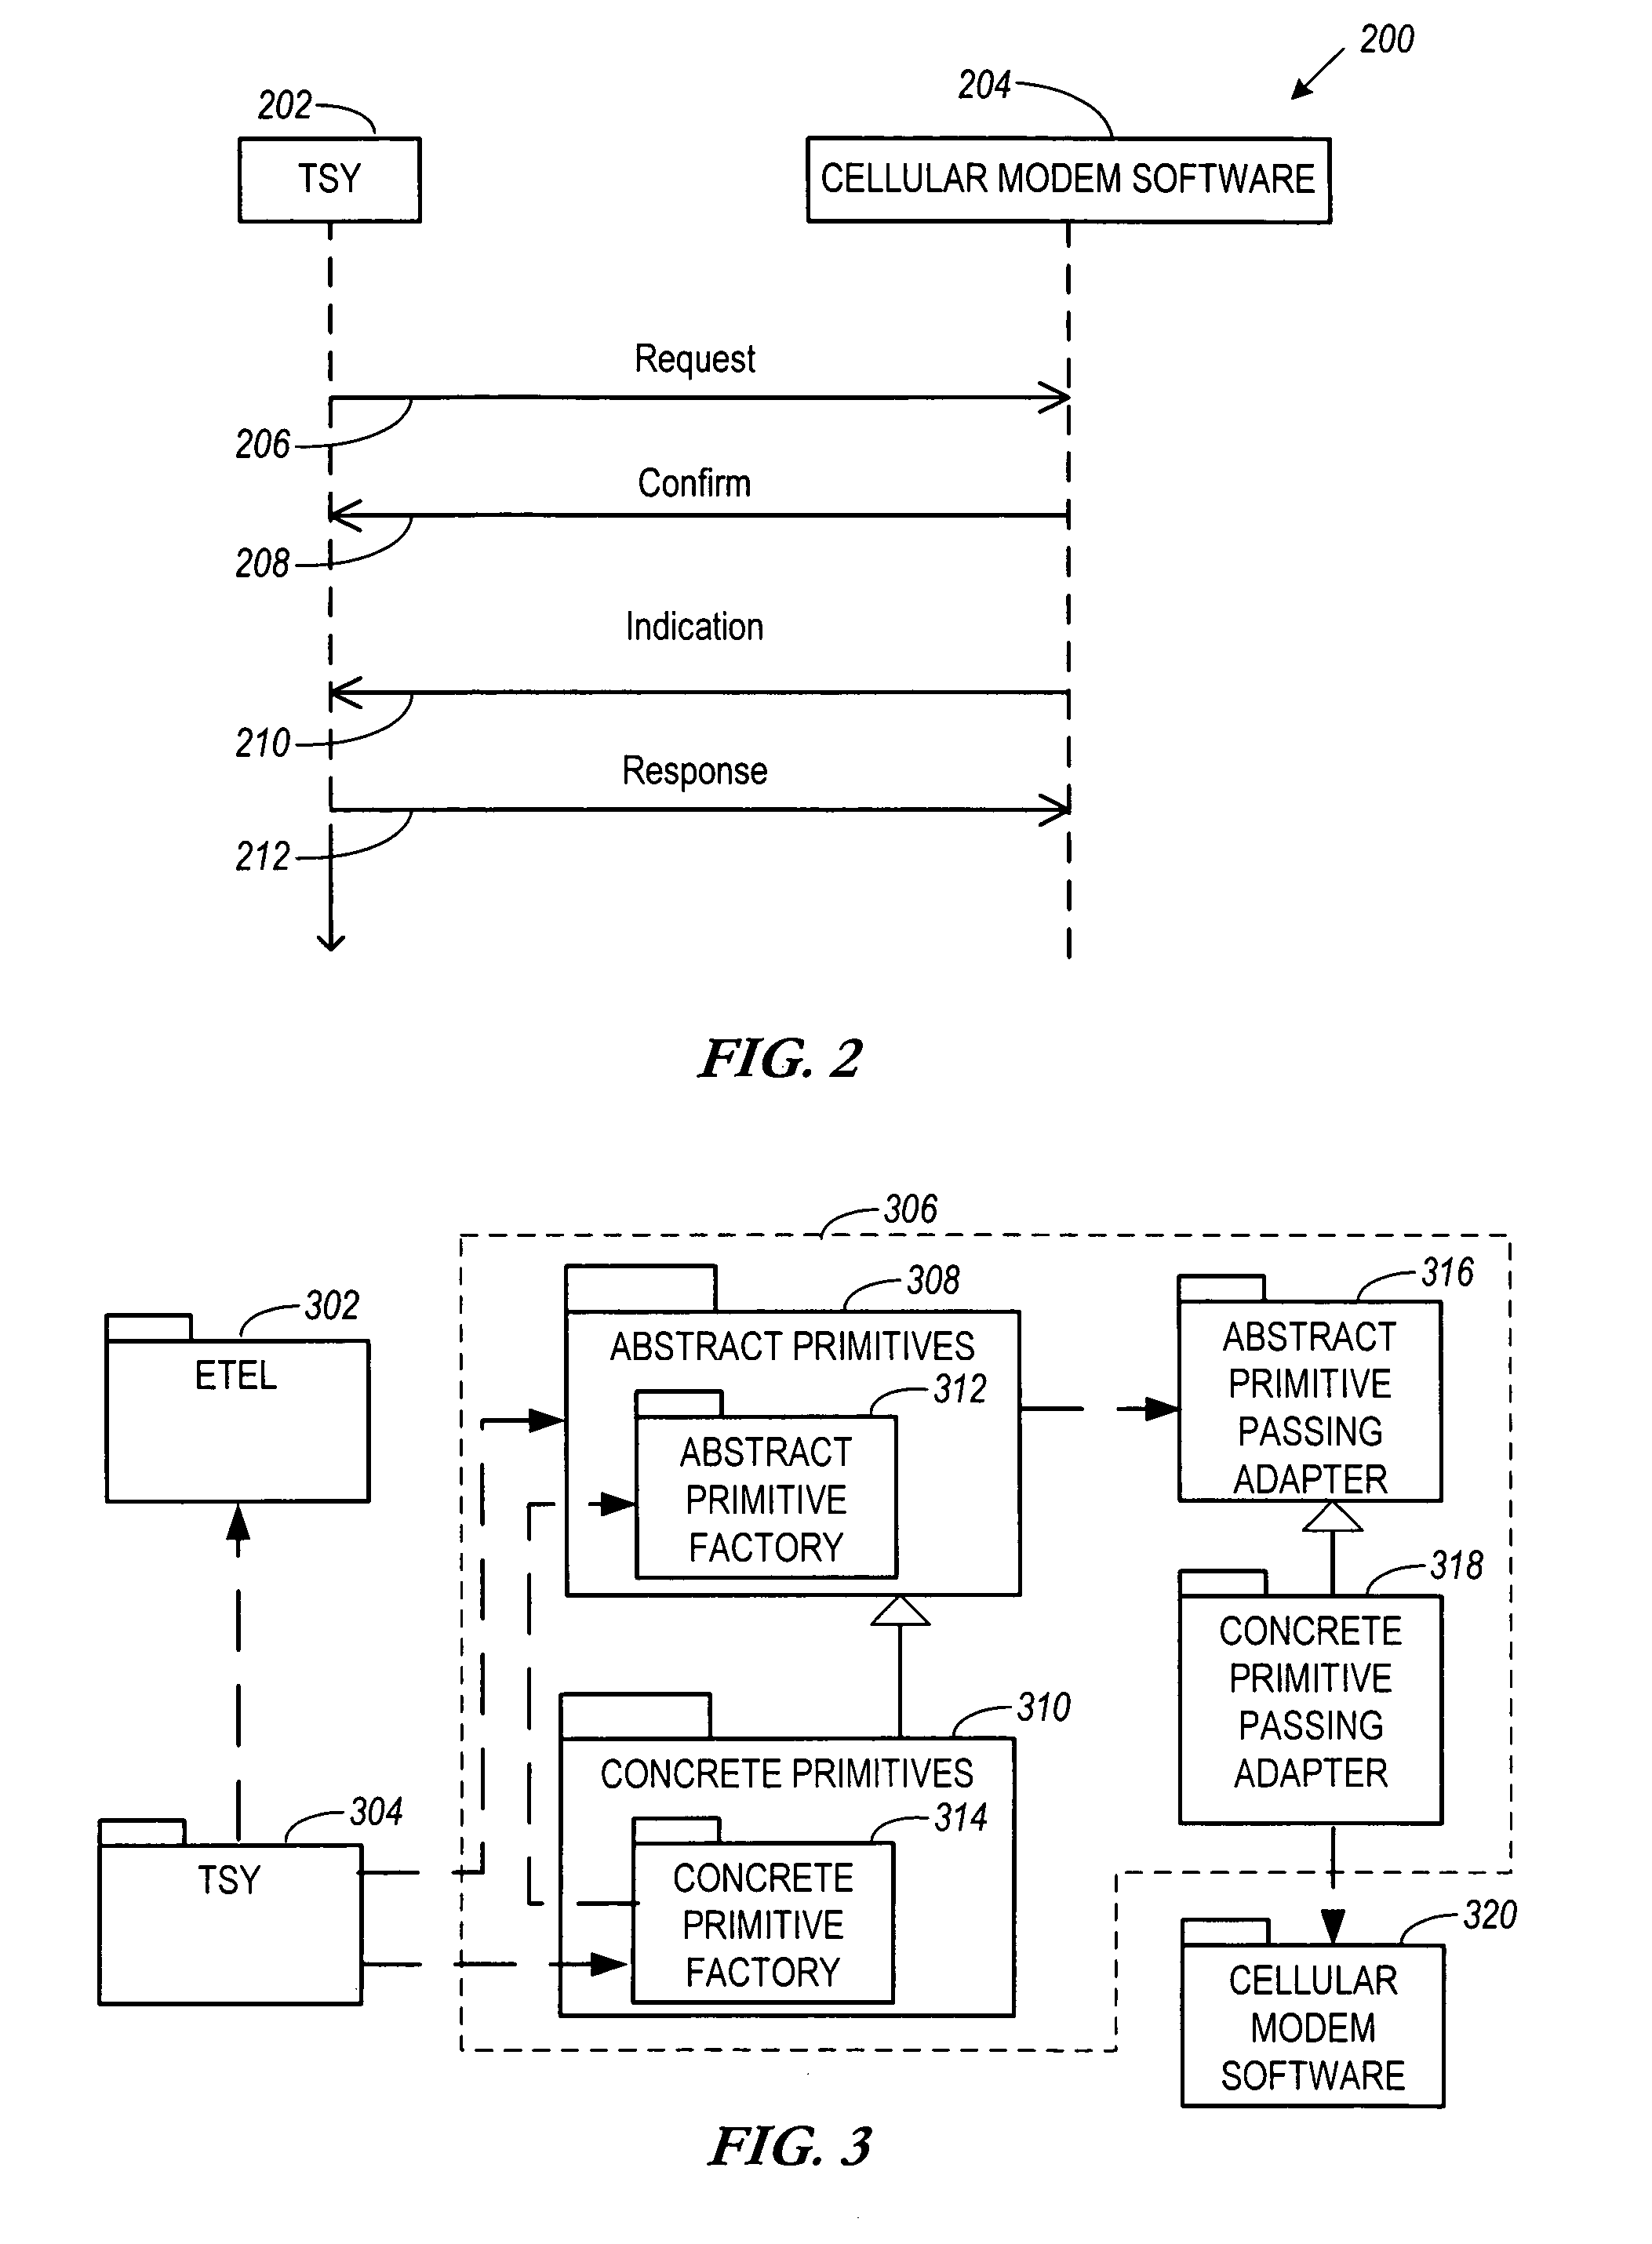 Apparatus and method for communicating between cellular modem software and application engine software of a communications device